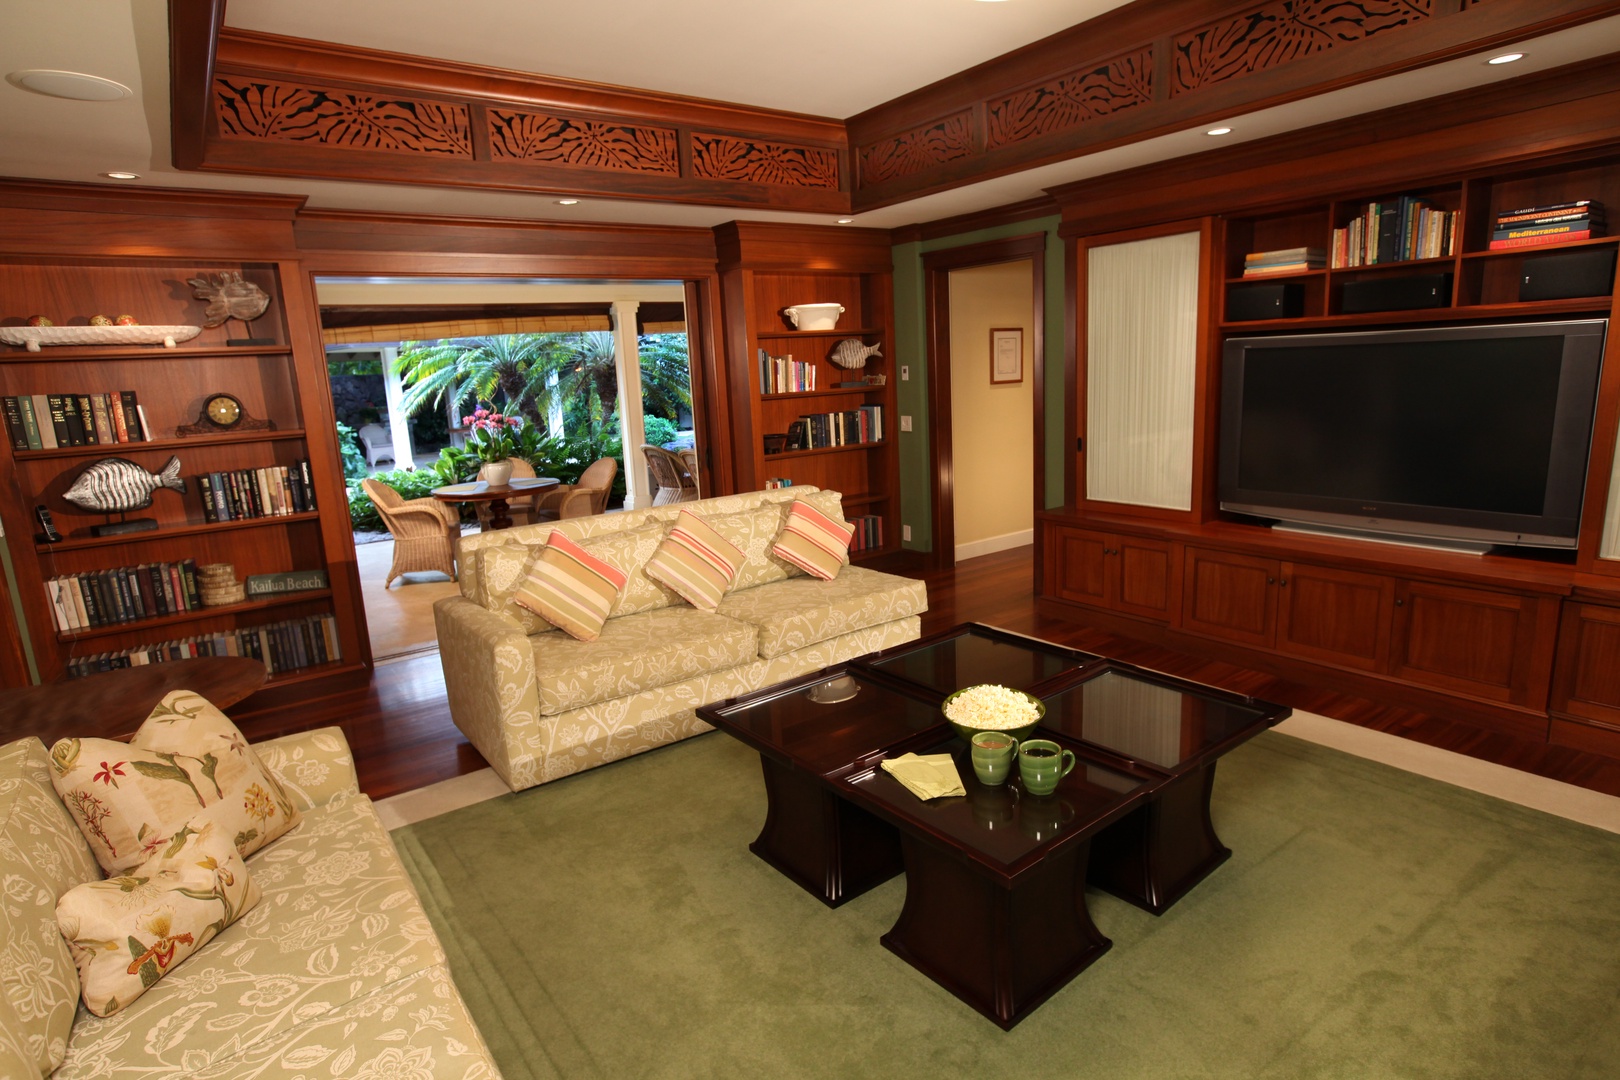 Kailua Vacation Rentals, Paradise Pointe Estates* - Library and TV room